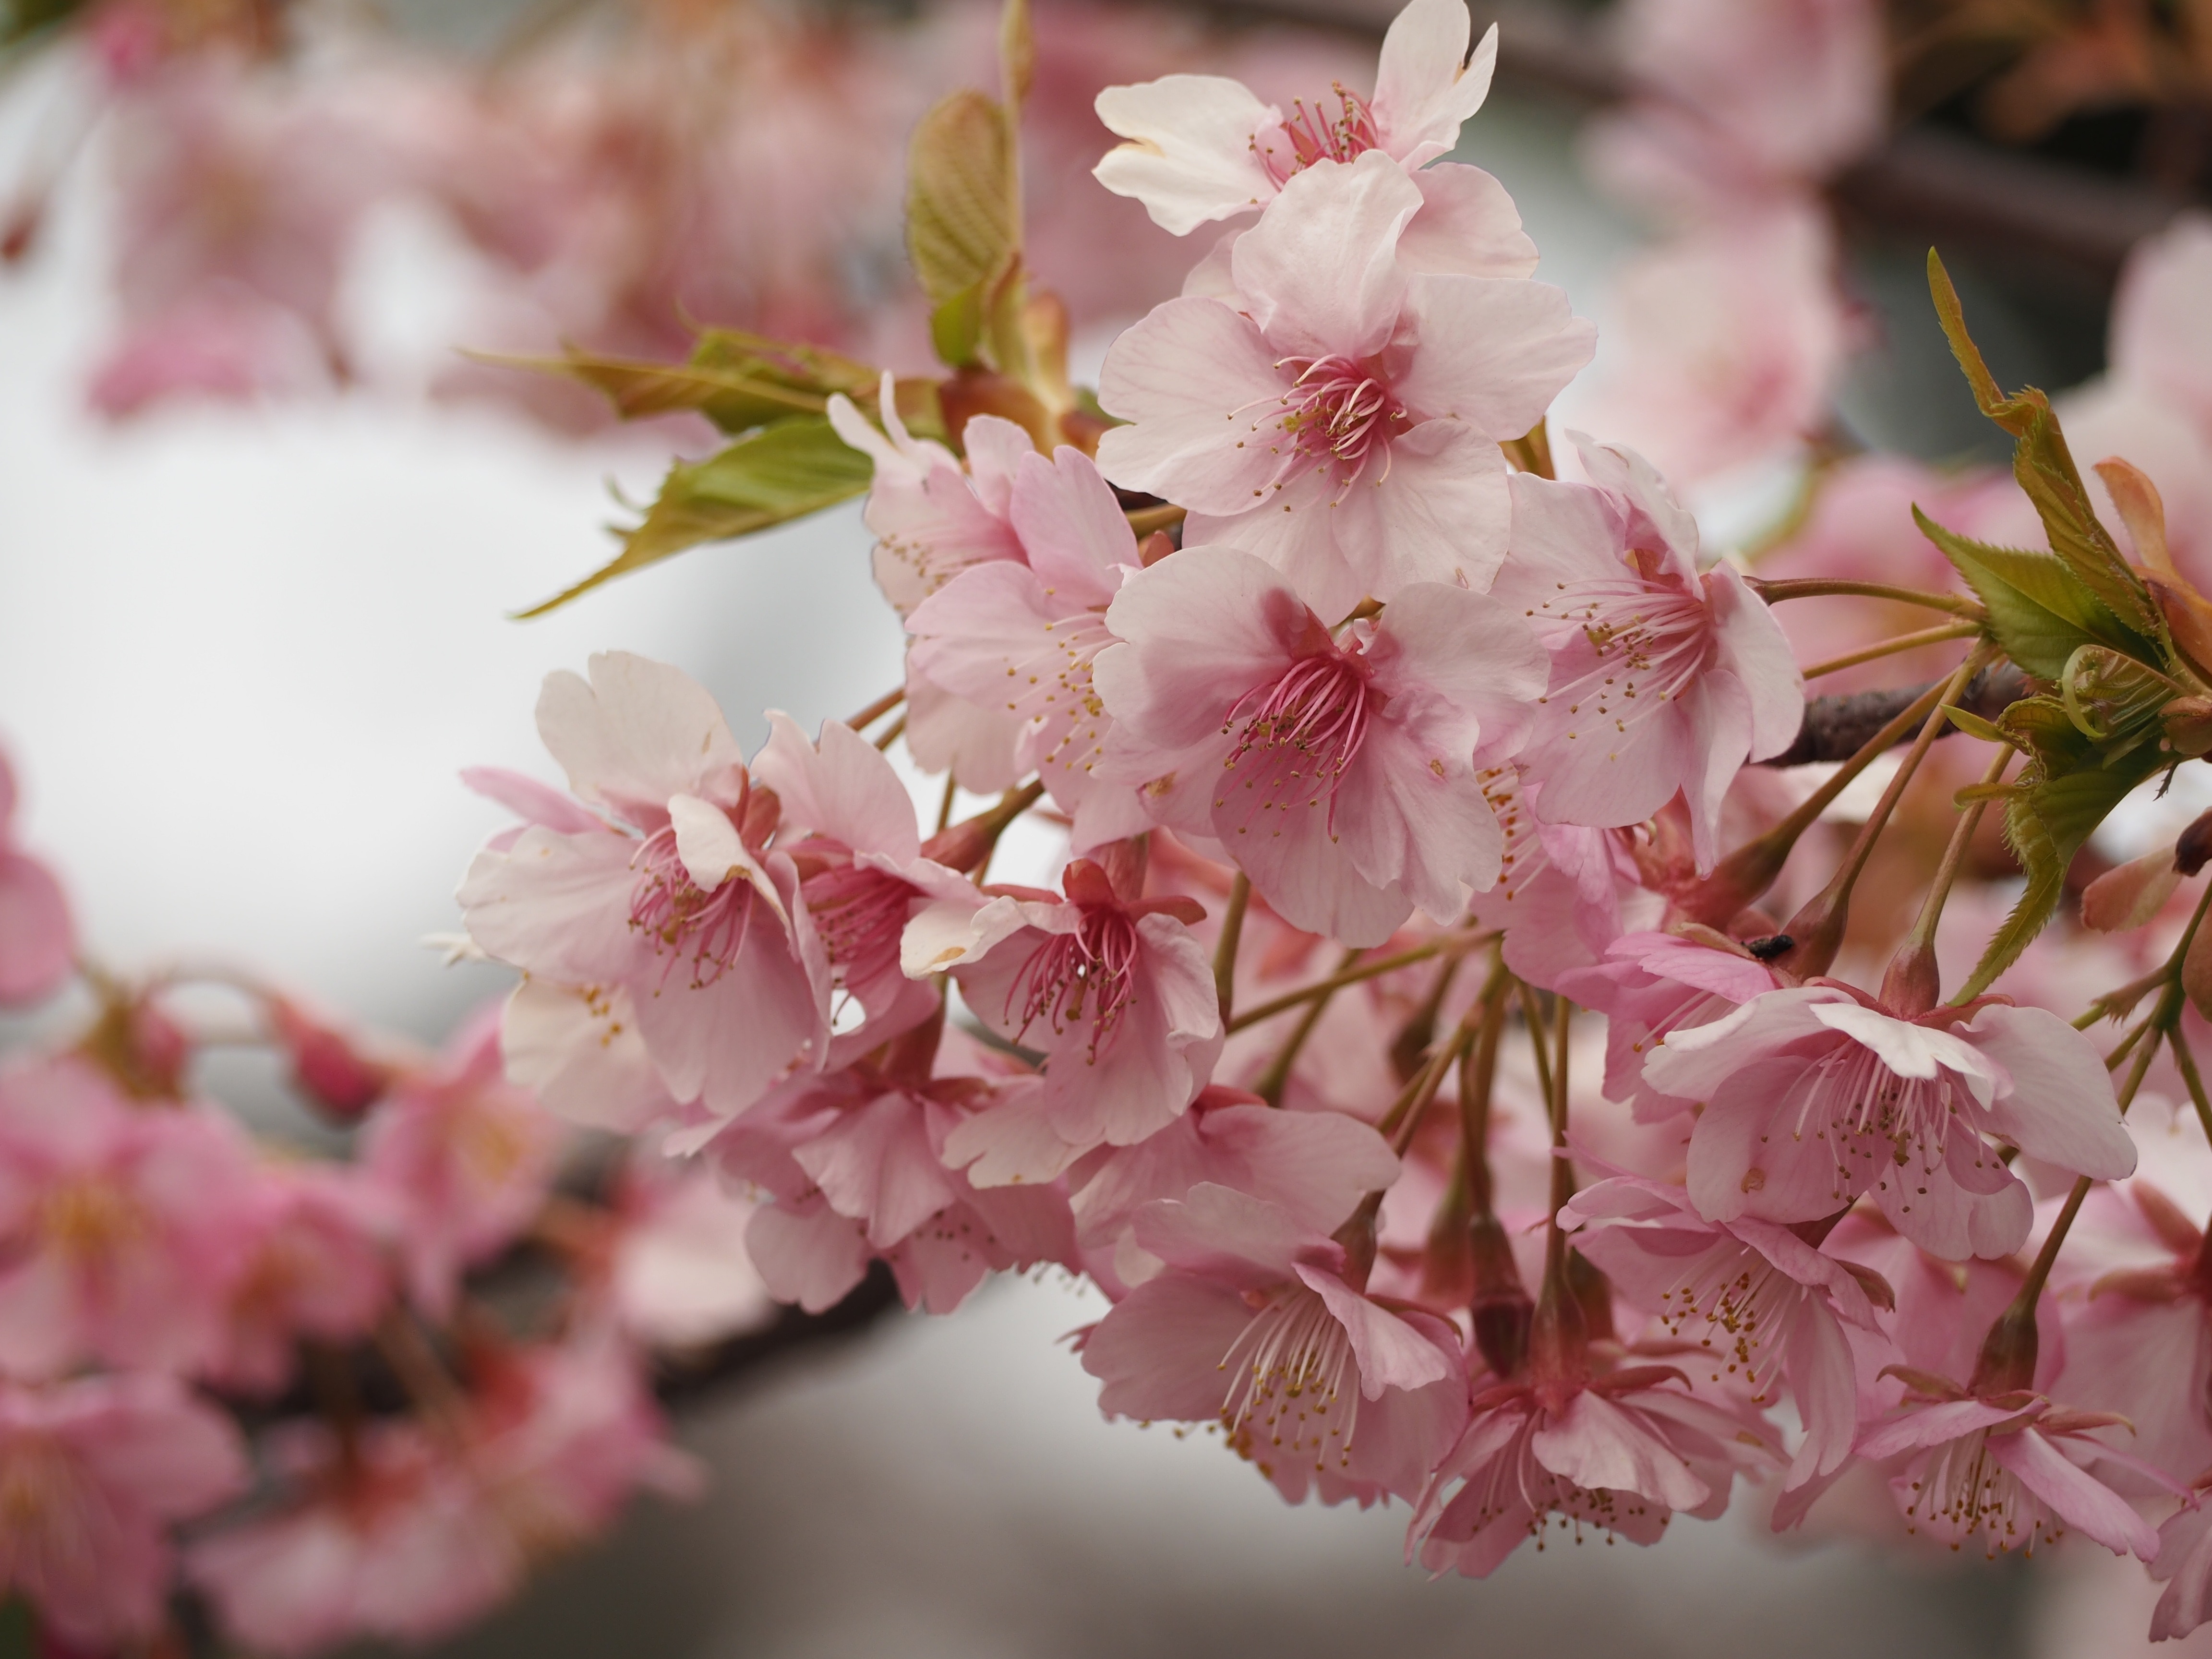 pink and white cherry blossom